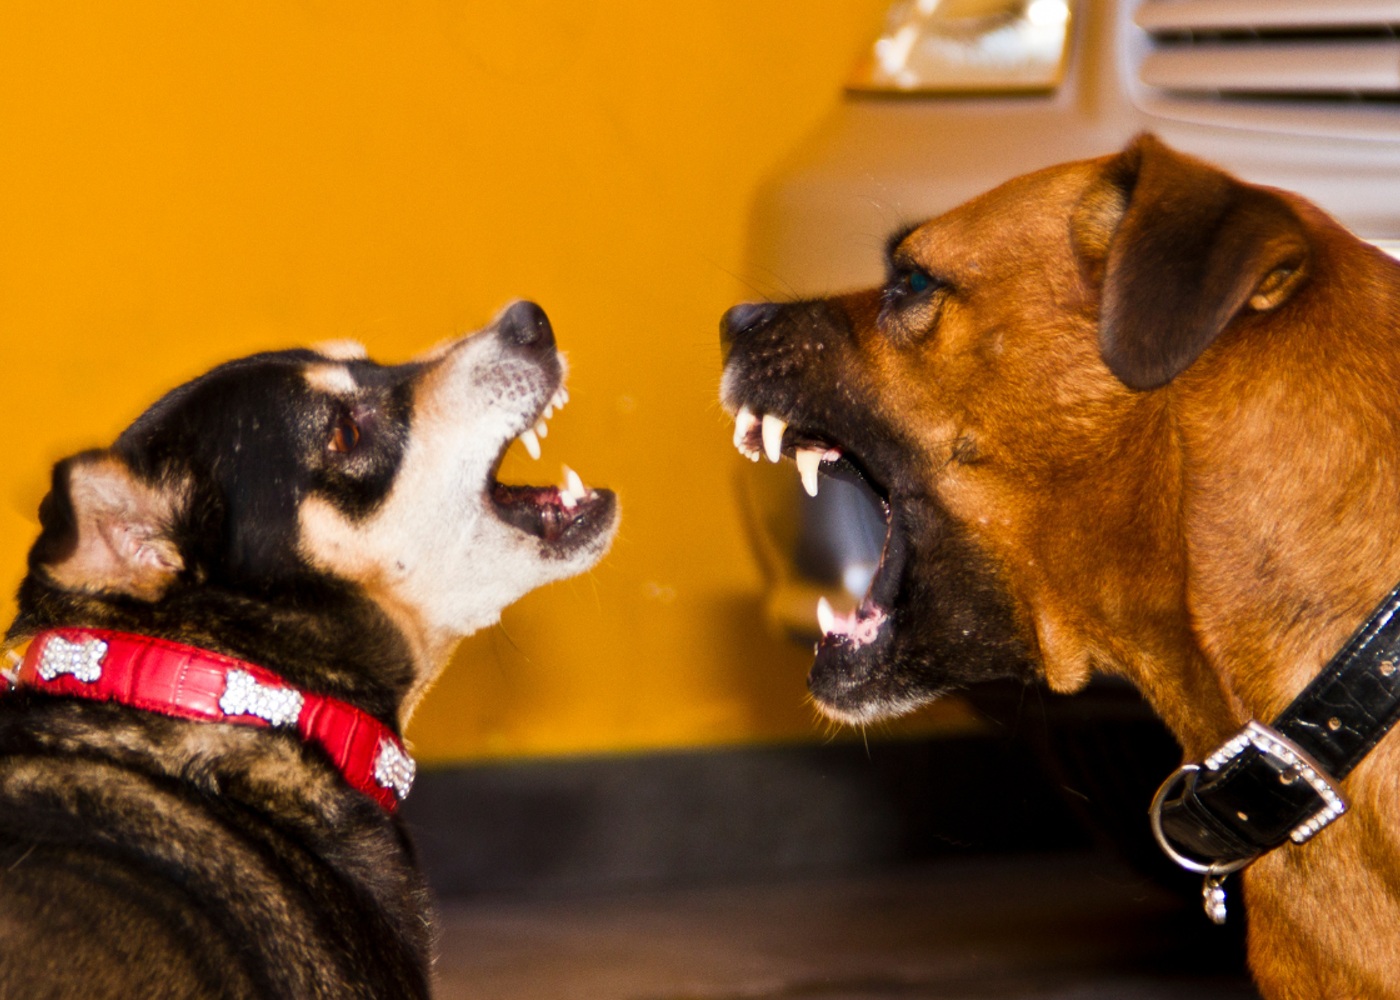 Two dogs aggressively barking at each other. Are you in need of dog behavior modification training for your dog? Contact Dog Training Elite of Southwest Florida today.